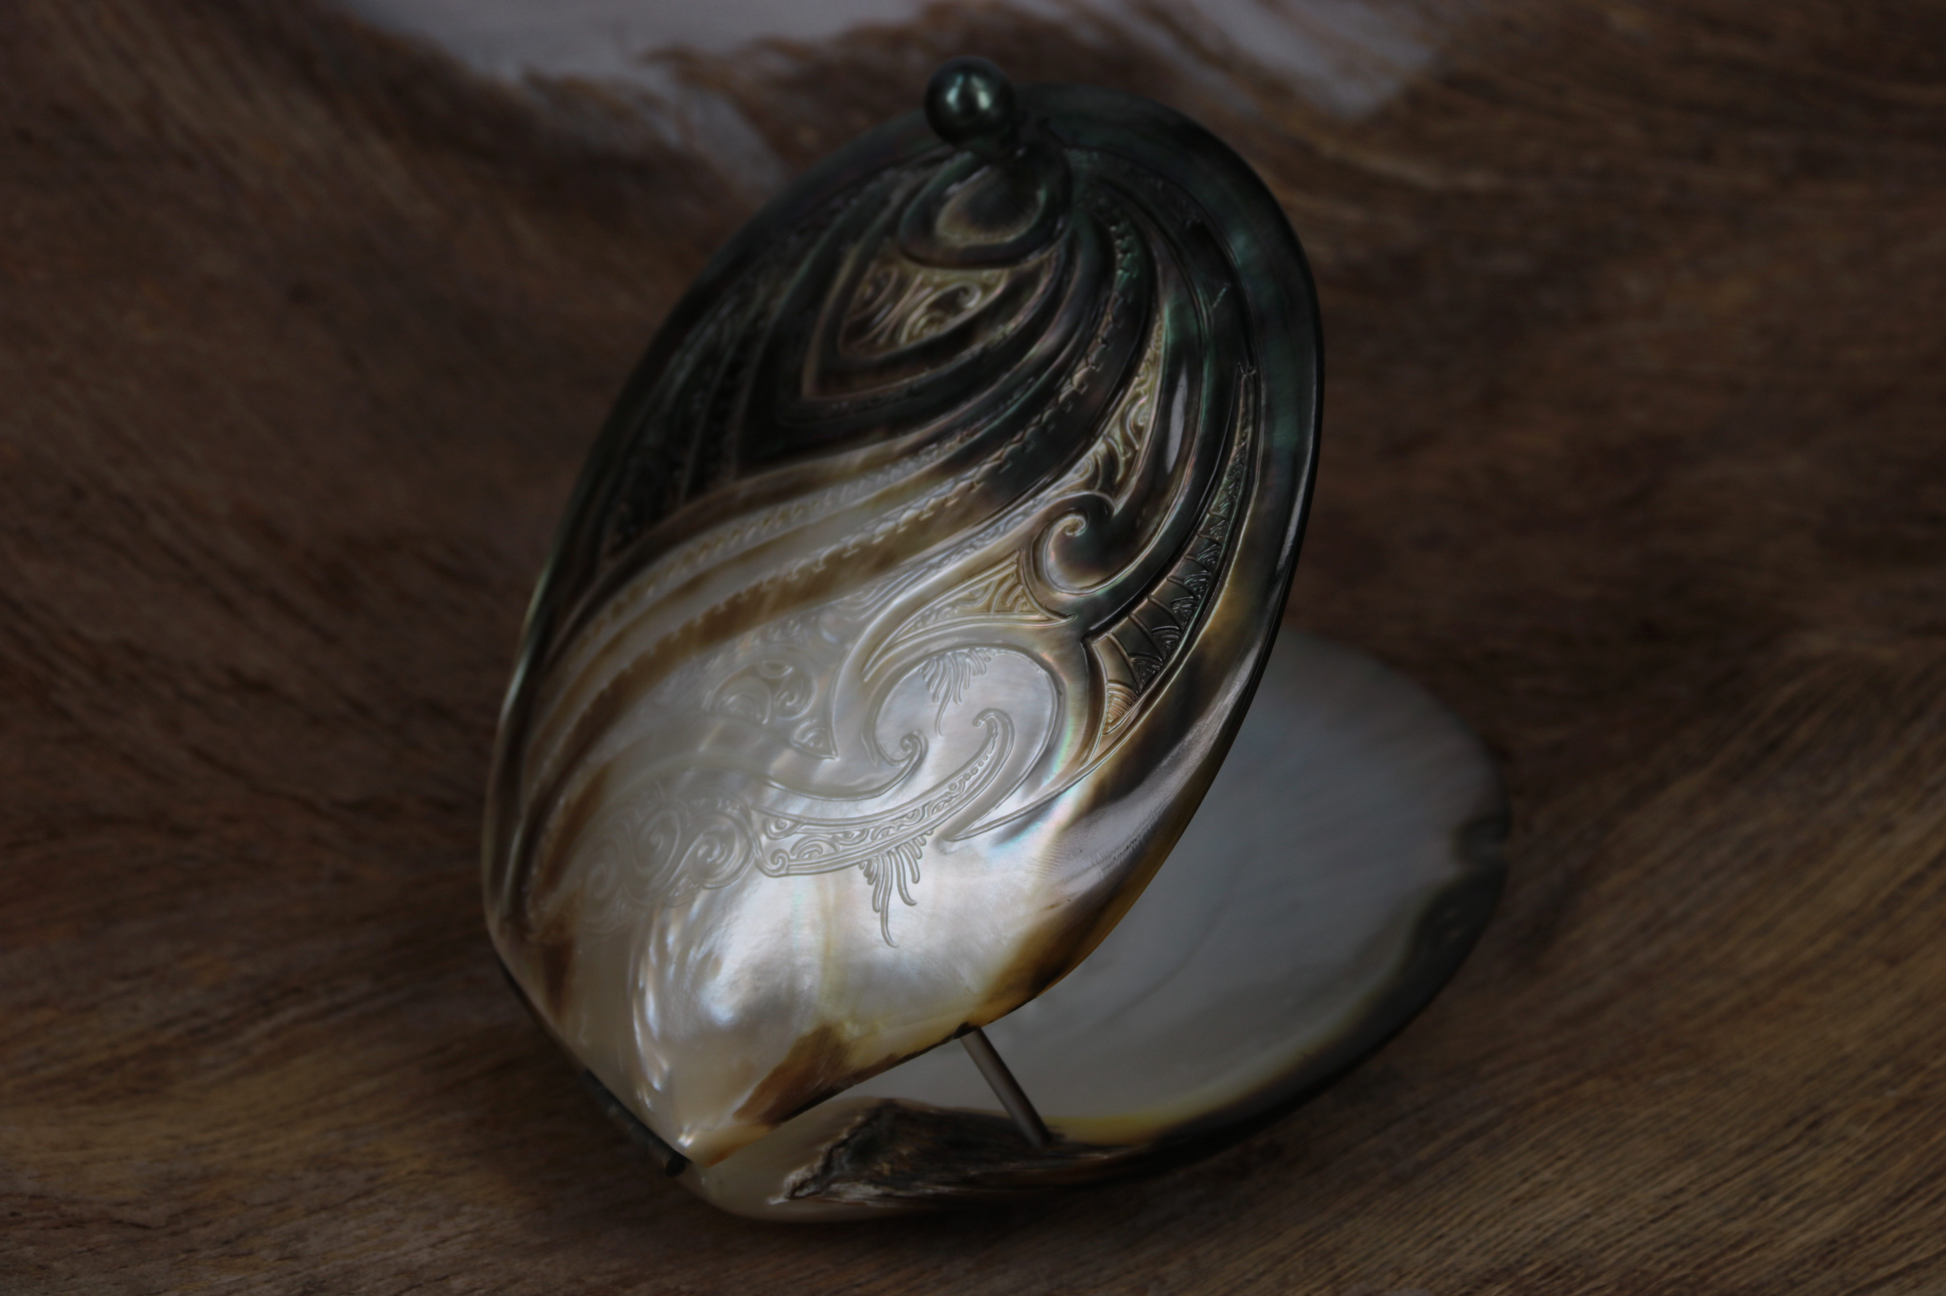 mother of pearl case engraved handmade with Tahitian pearl and polynesian design by Prokop Tahiti